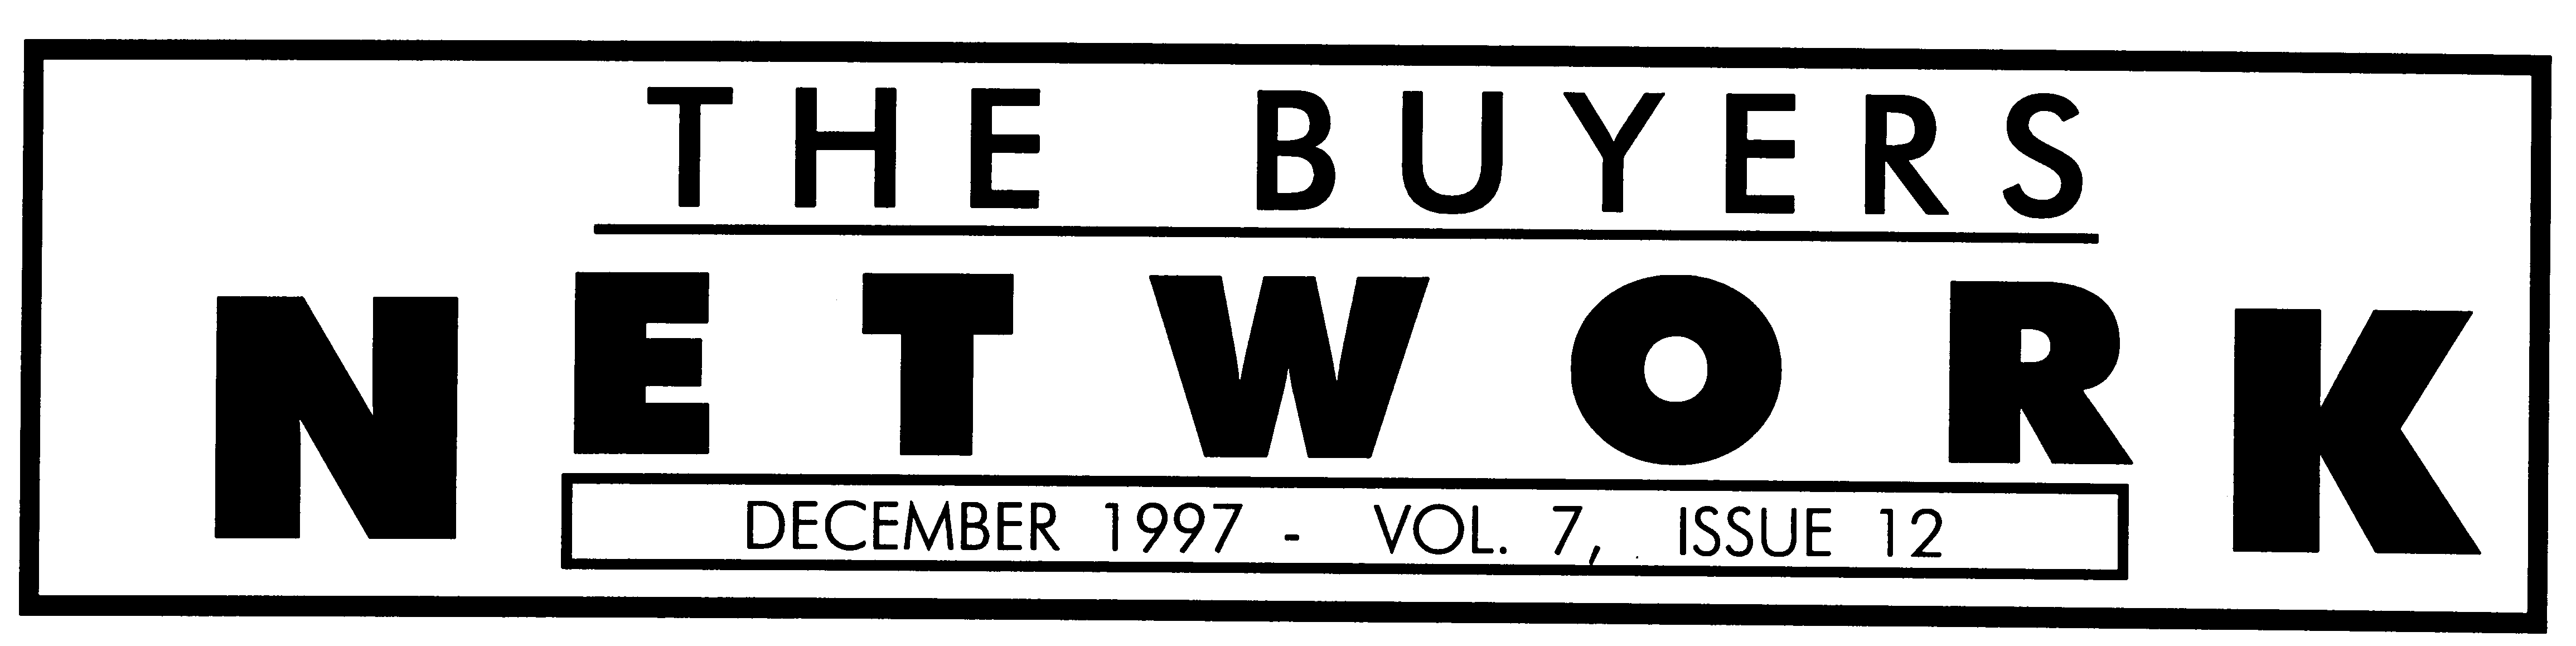 The Buyers Network December 1997